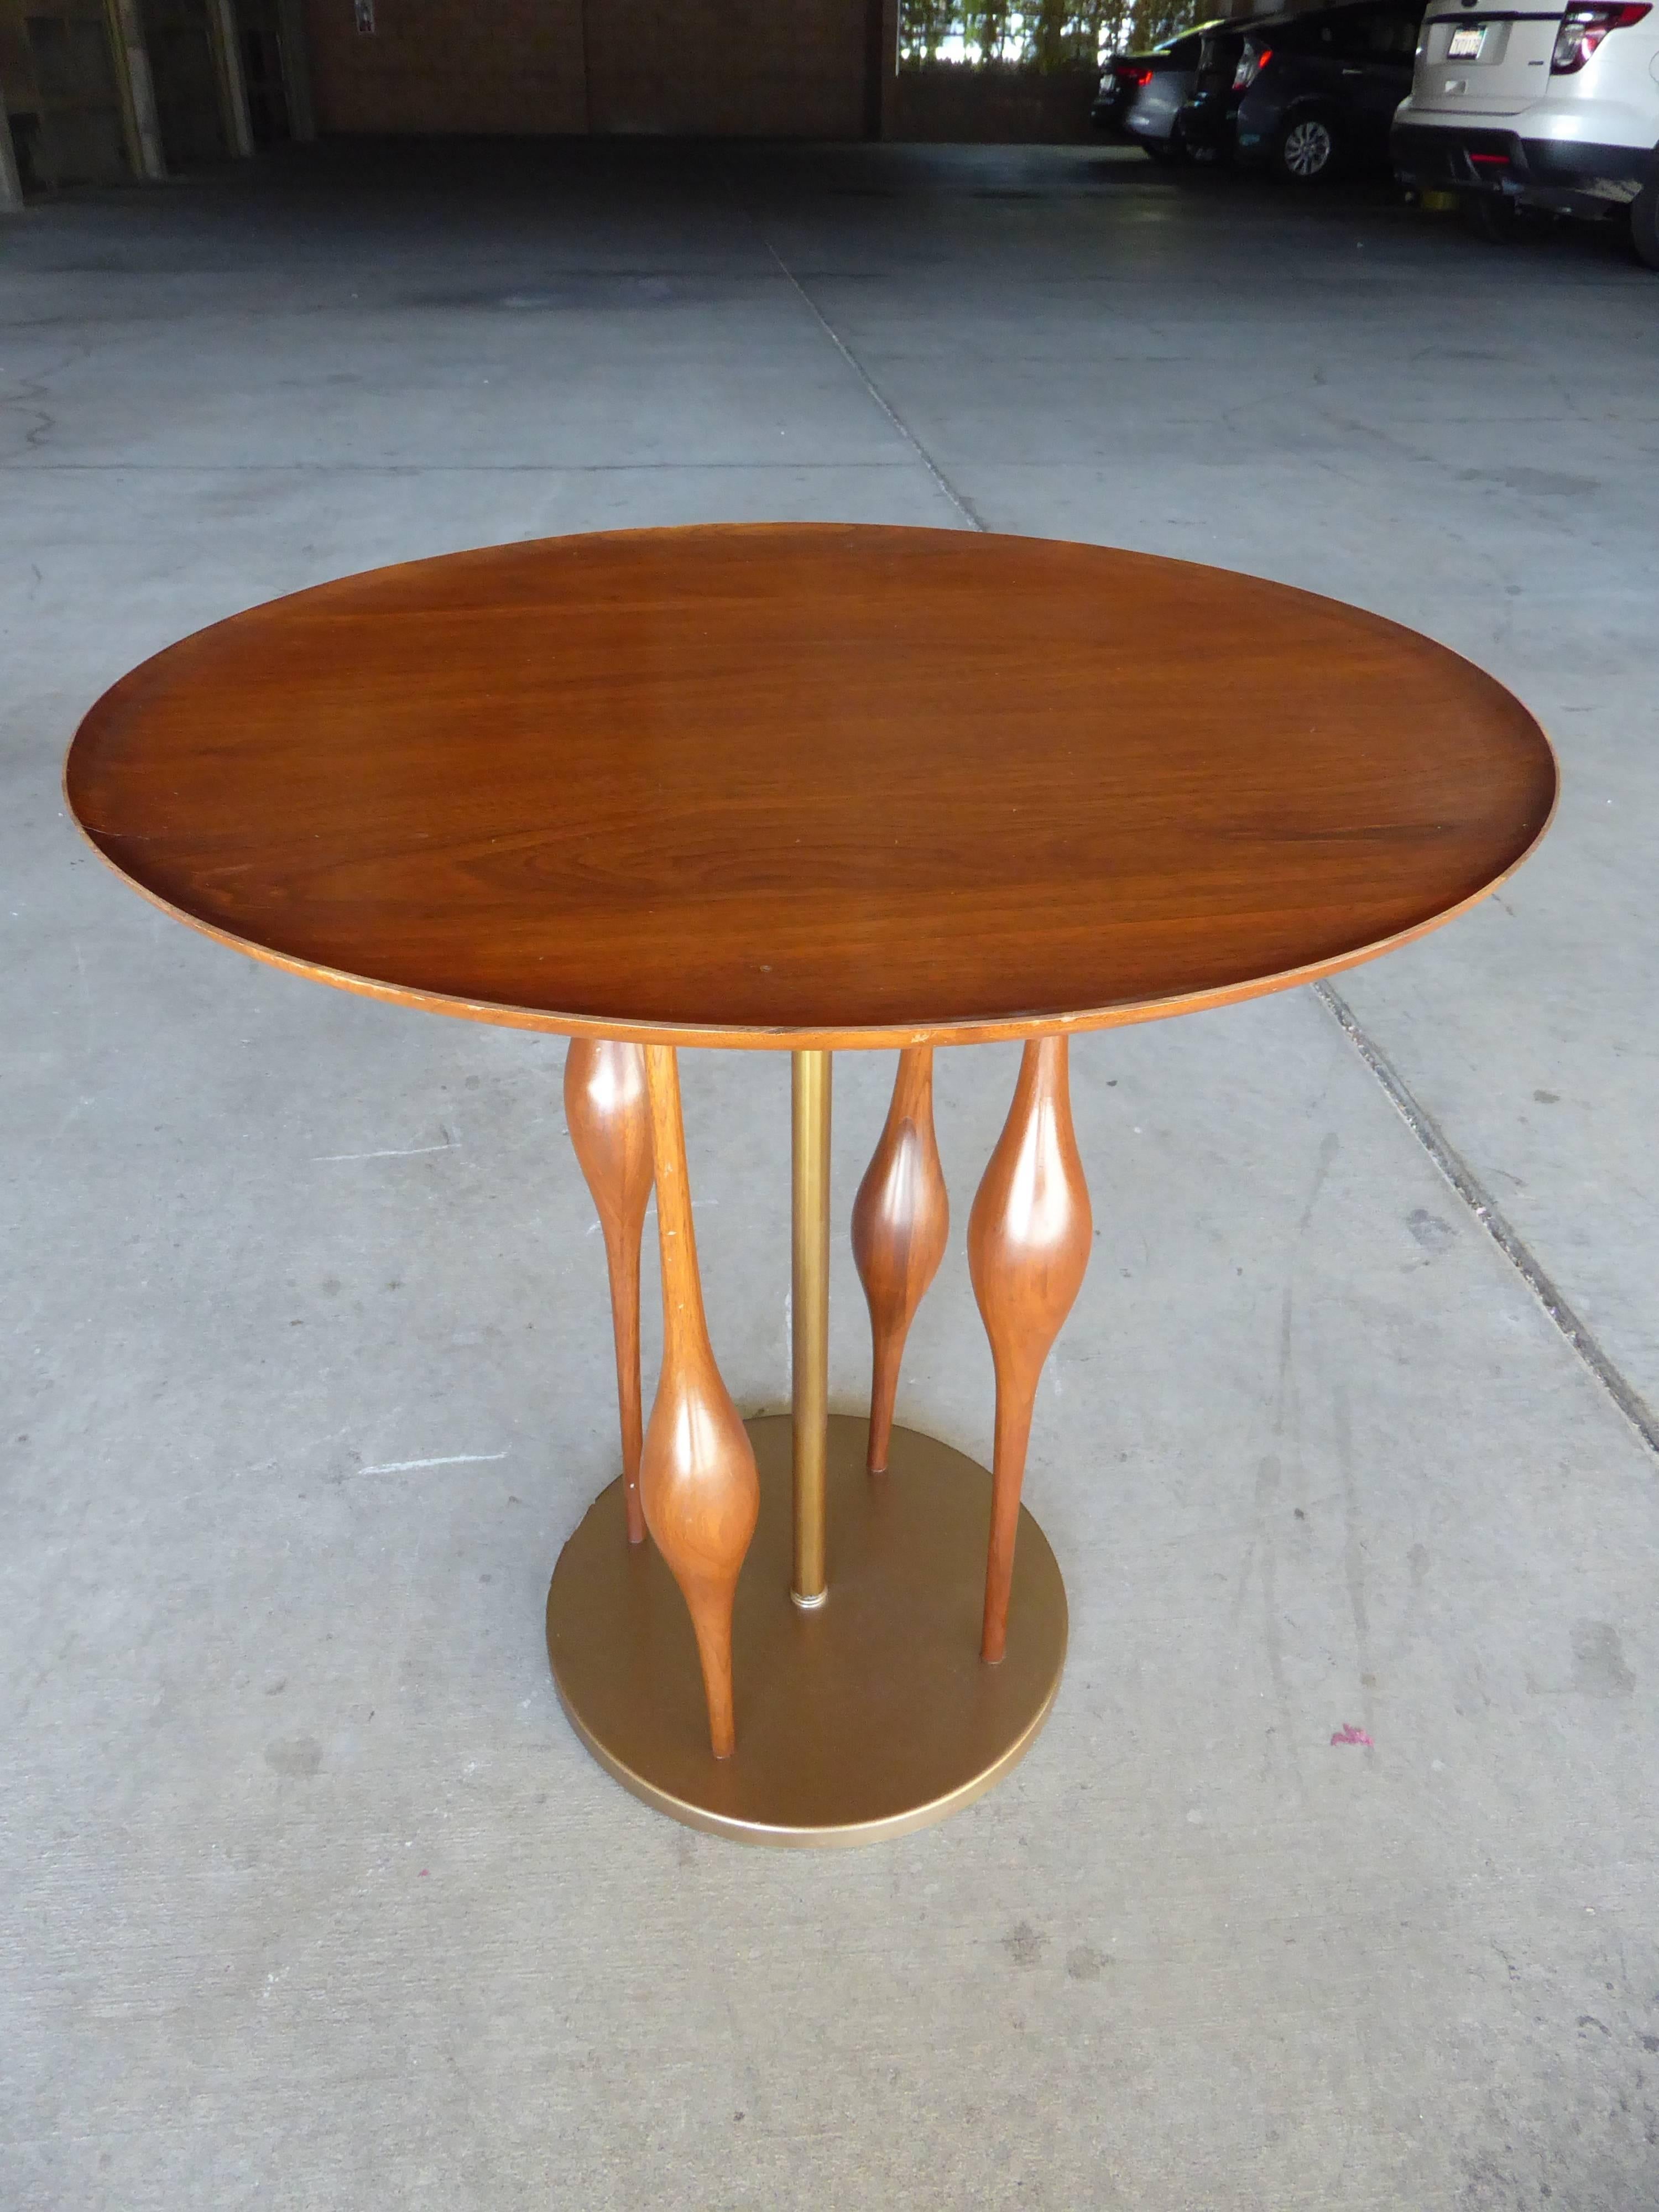 Mid-Century Modern Mode Line Mahogany Side Table Attributed to Adrian Pearsall C. 1950's For Sale